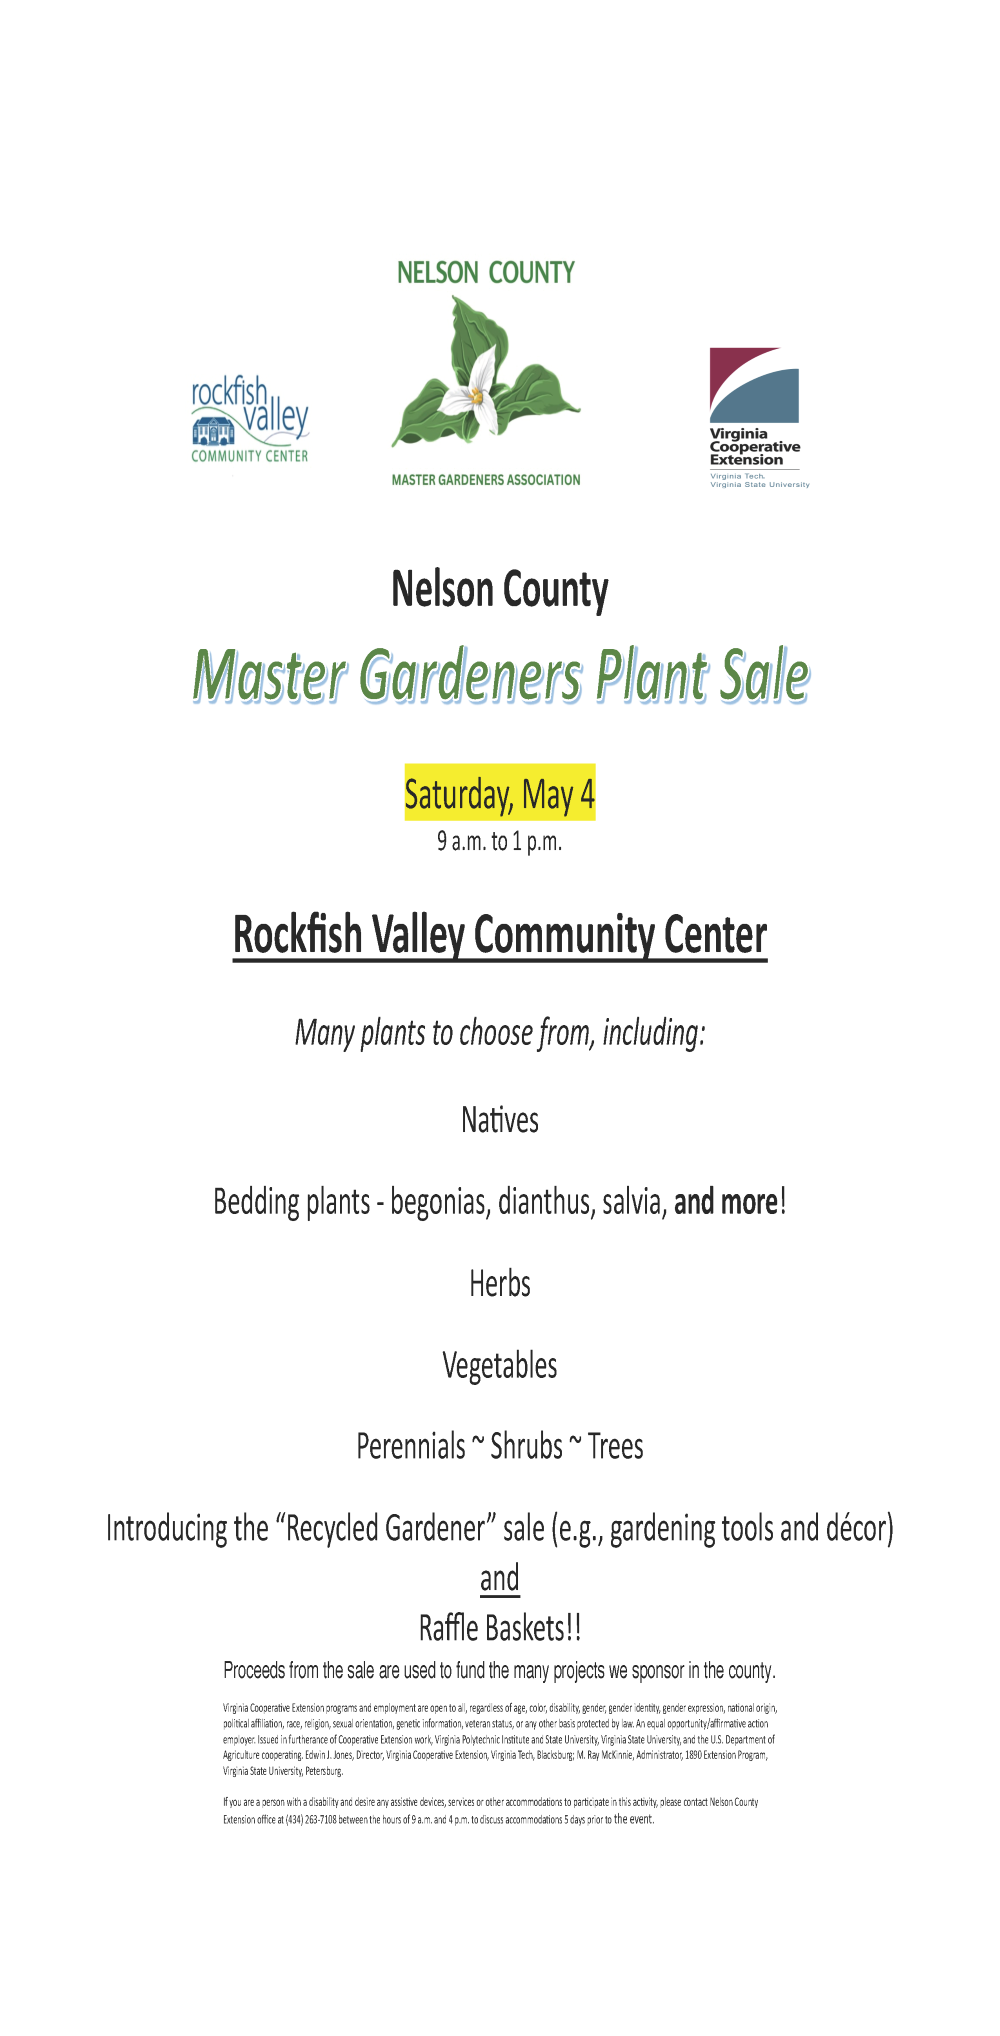 Nelson County Master Gardeners Plant Sale!